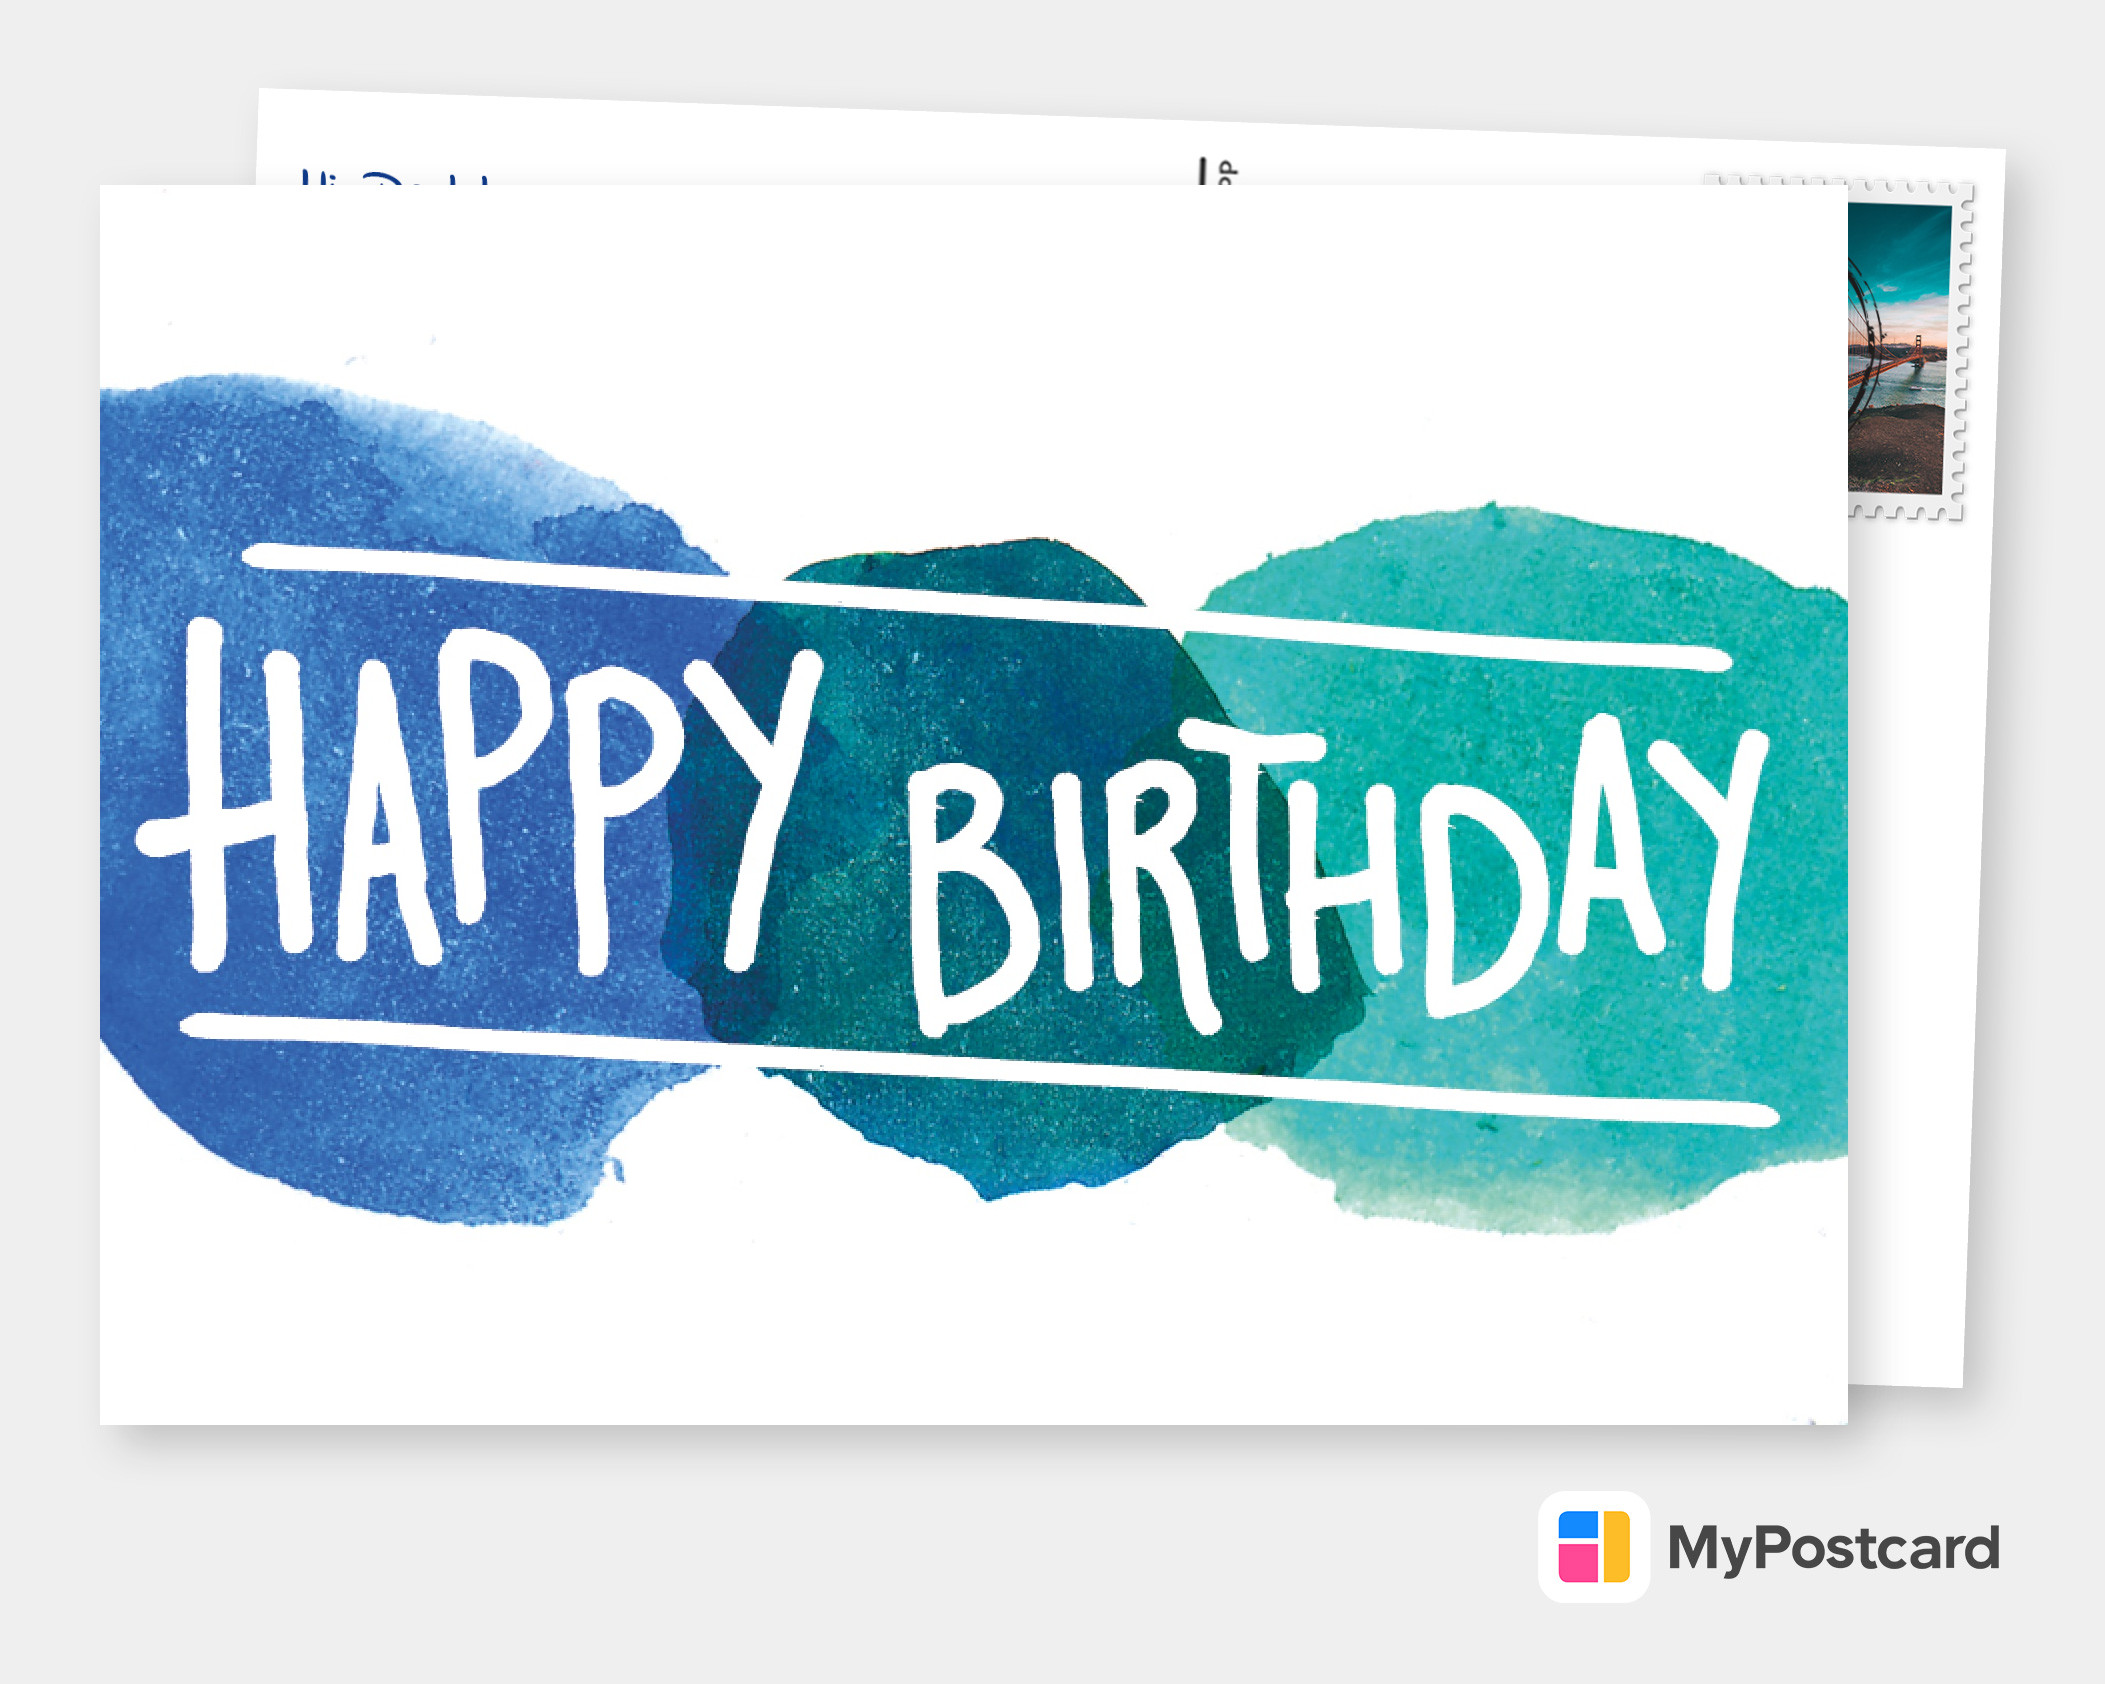 Create Your Own Happy Birthday Cards | Free Printable Templates | Printed & Mailed For You ...